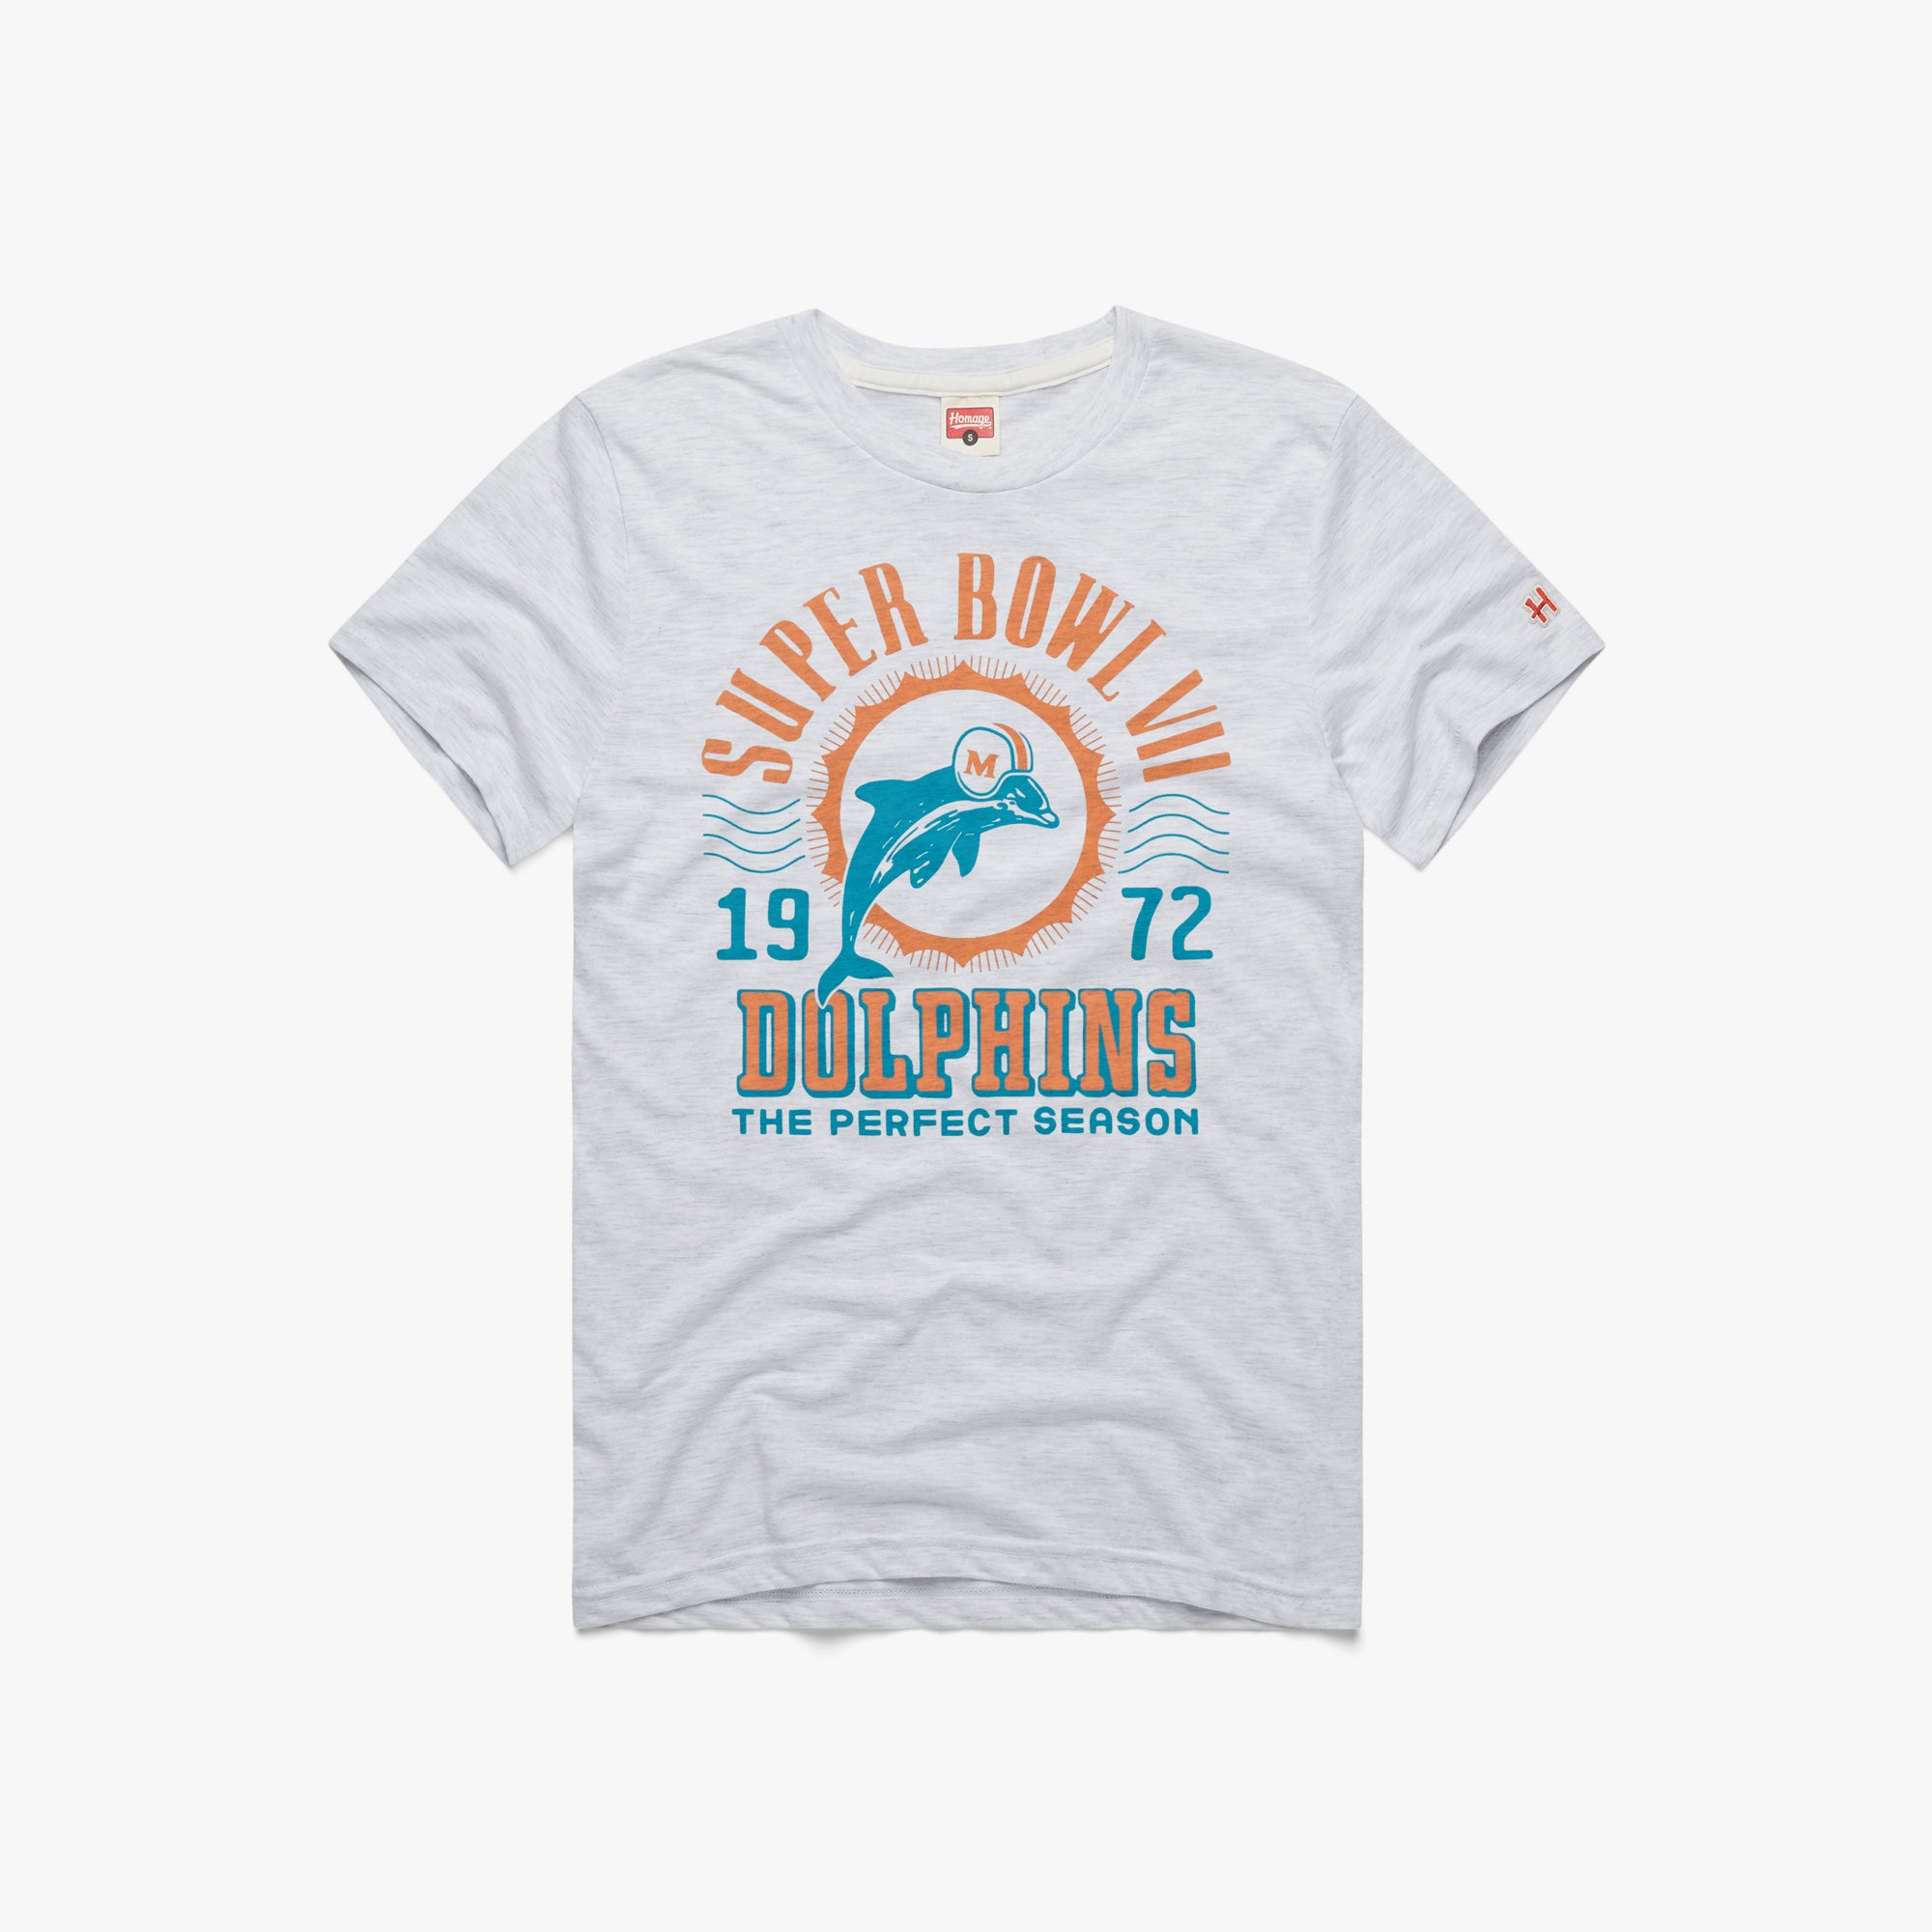 Miami Dolphins 1972 Perfect Season T-Shirt from Homage. | Officially Licensed Vintage NFL Apparel from Homage Pro Shop.